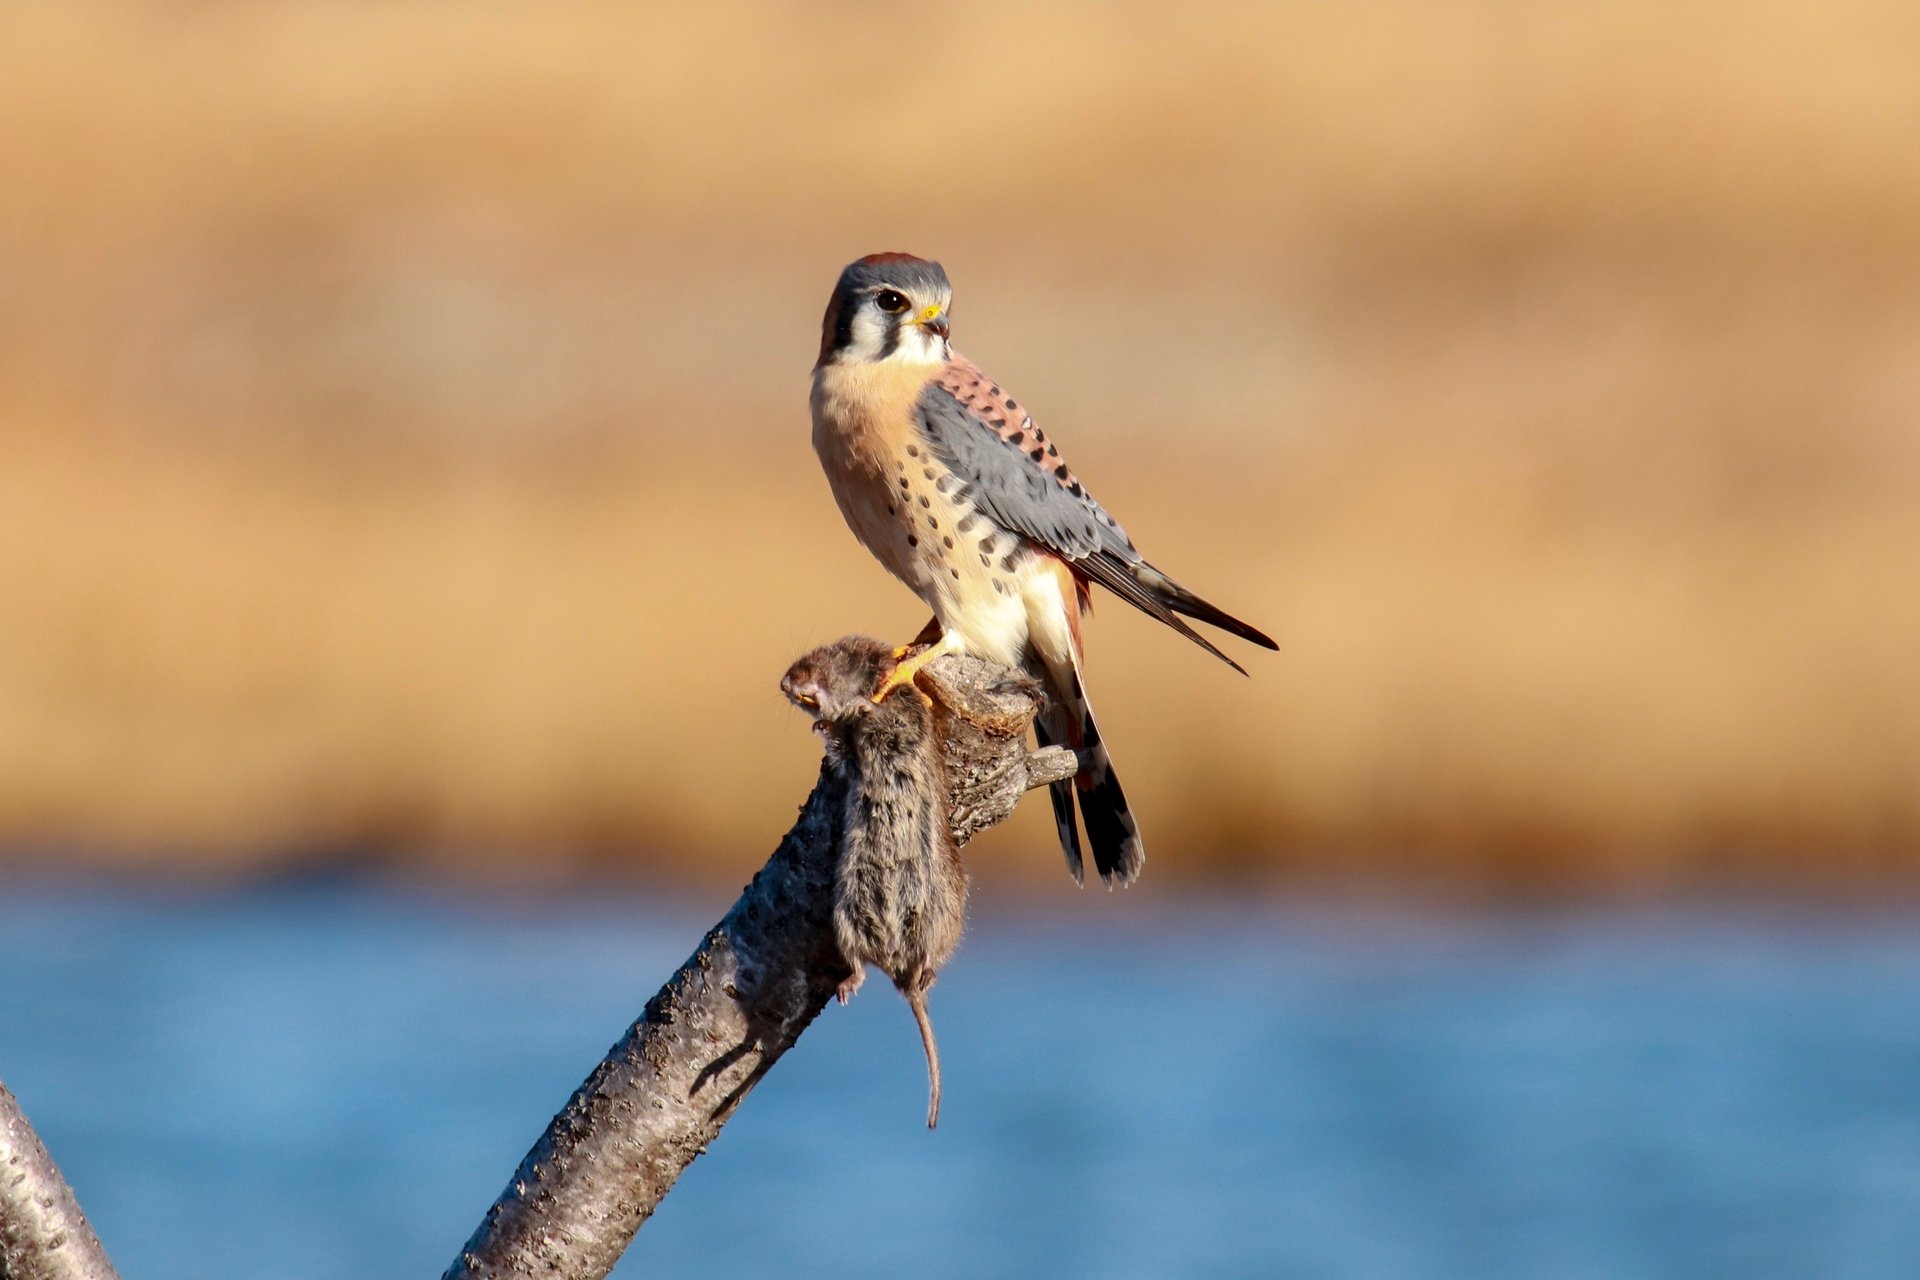 American Kestrel perched on branch with rodent catch